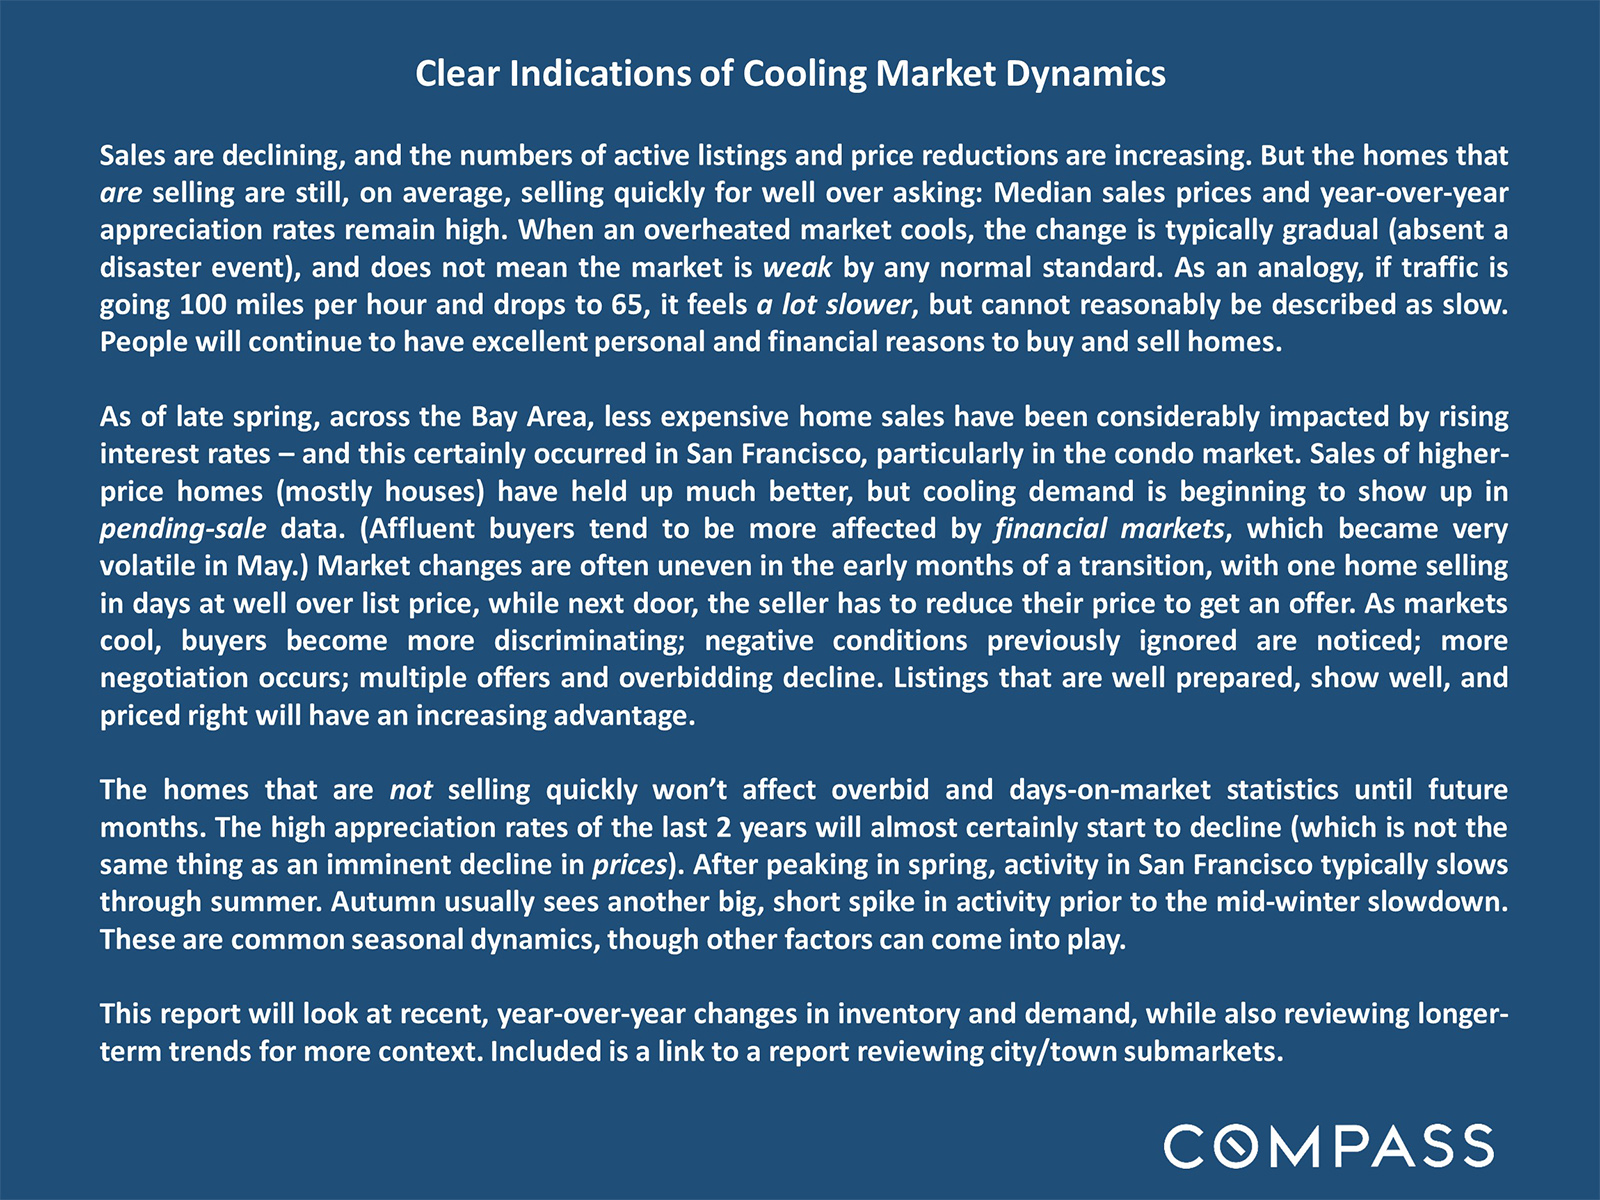 Clear Indications of Cooling Market Dynamics